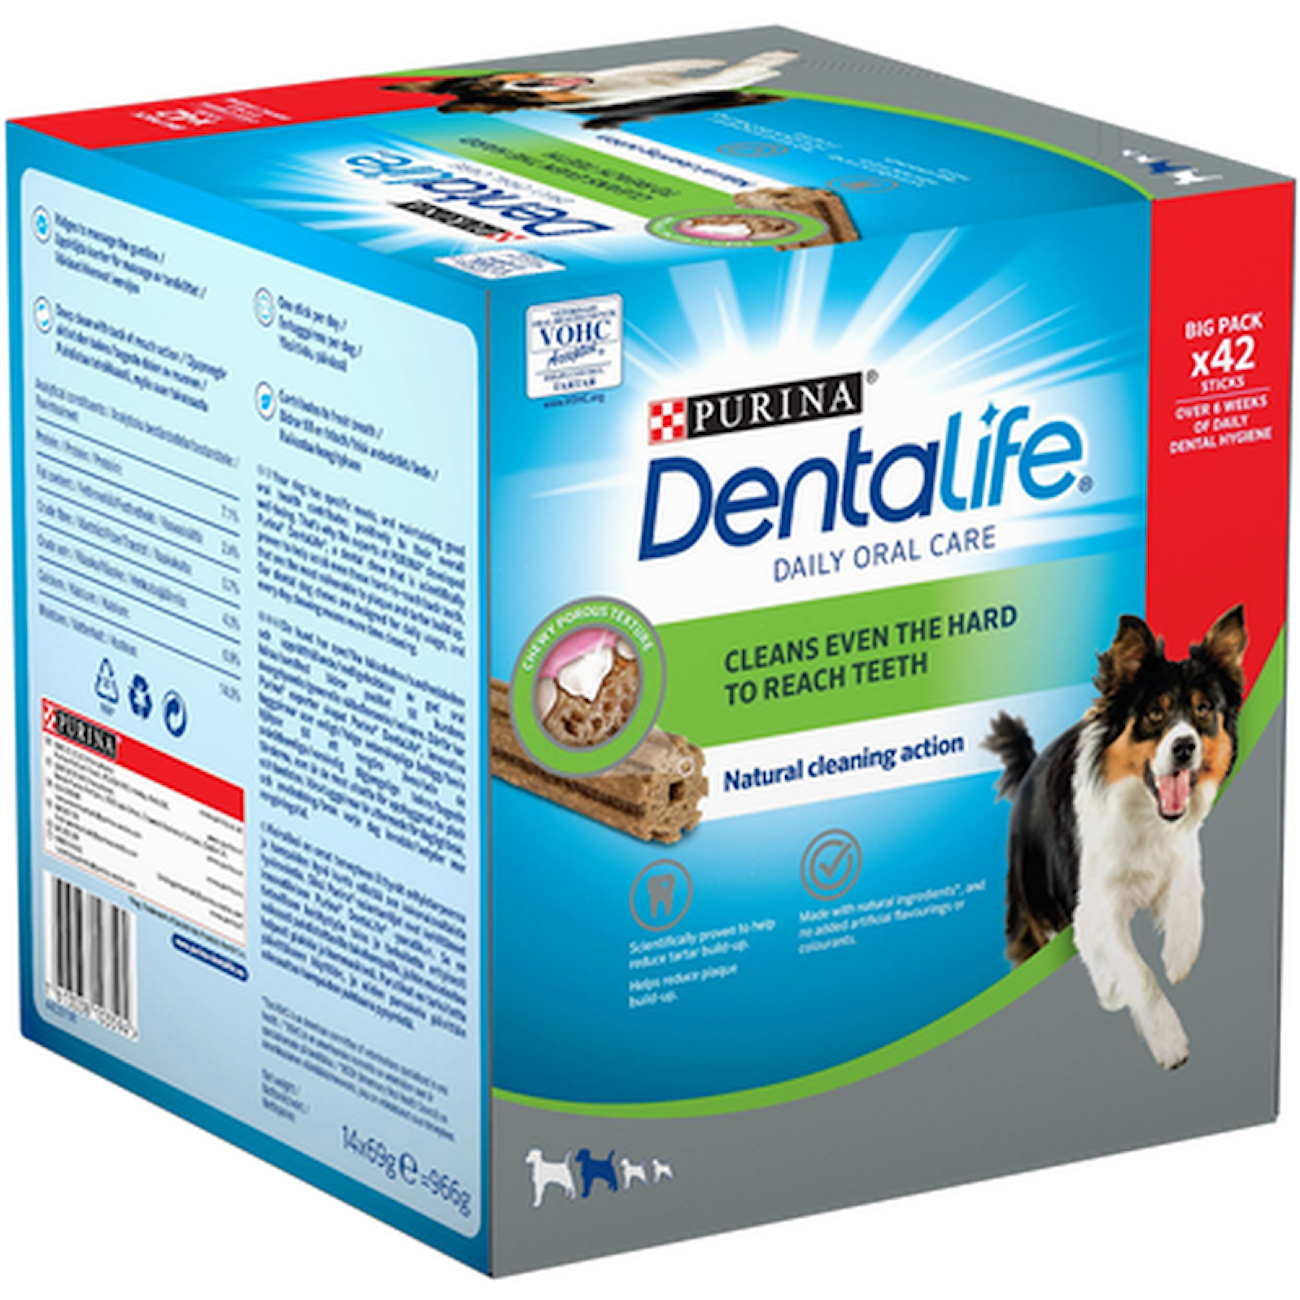 DentaLife Daily Oral Care Storpack